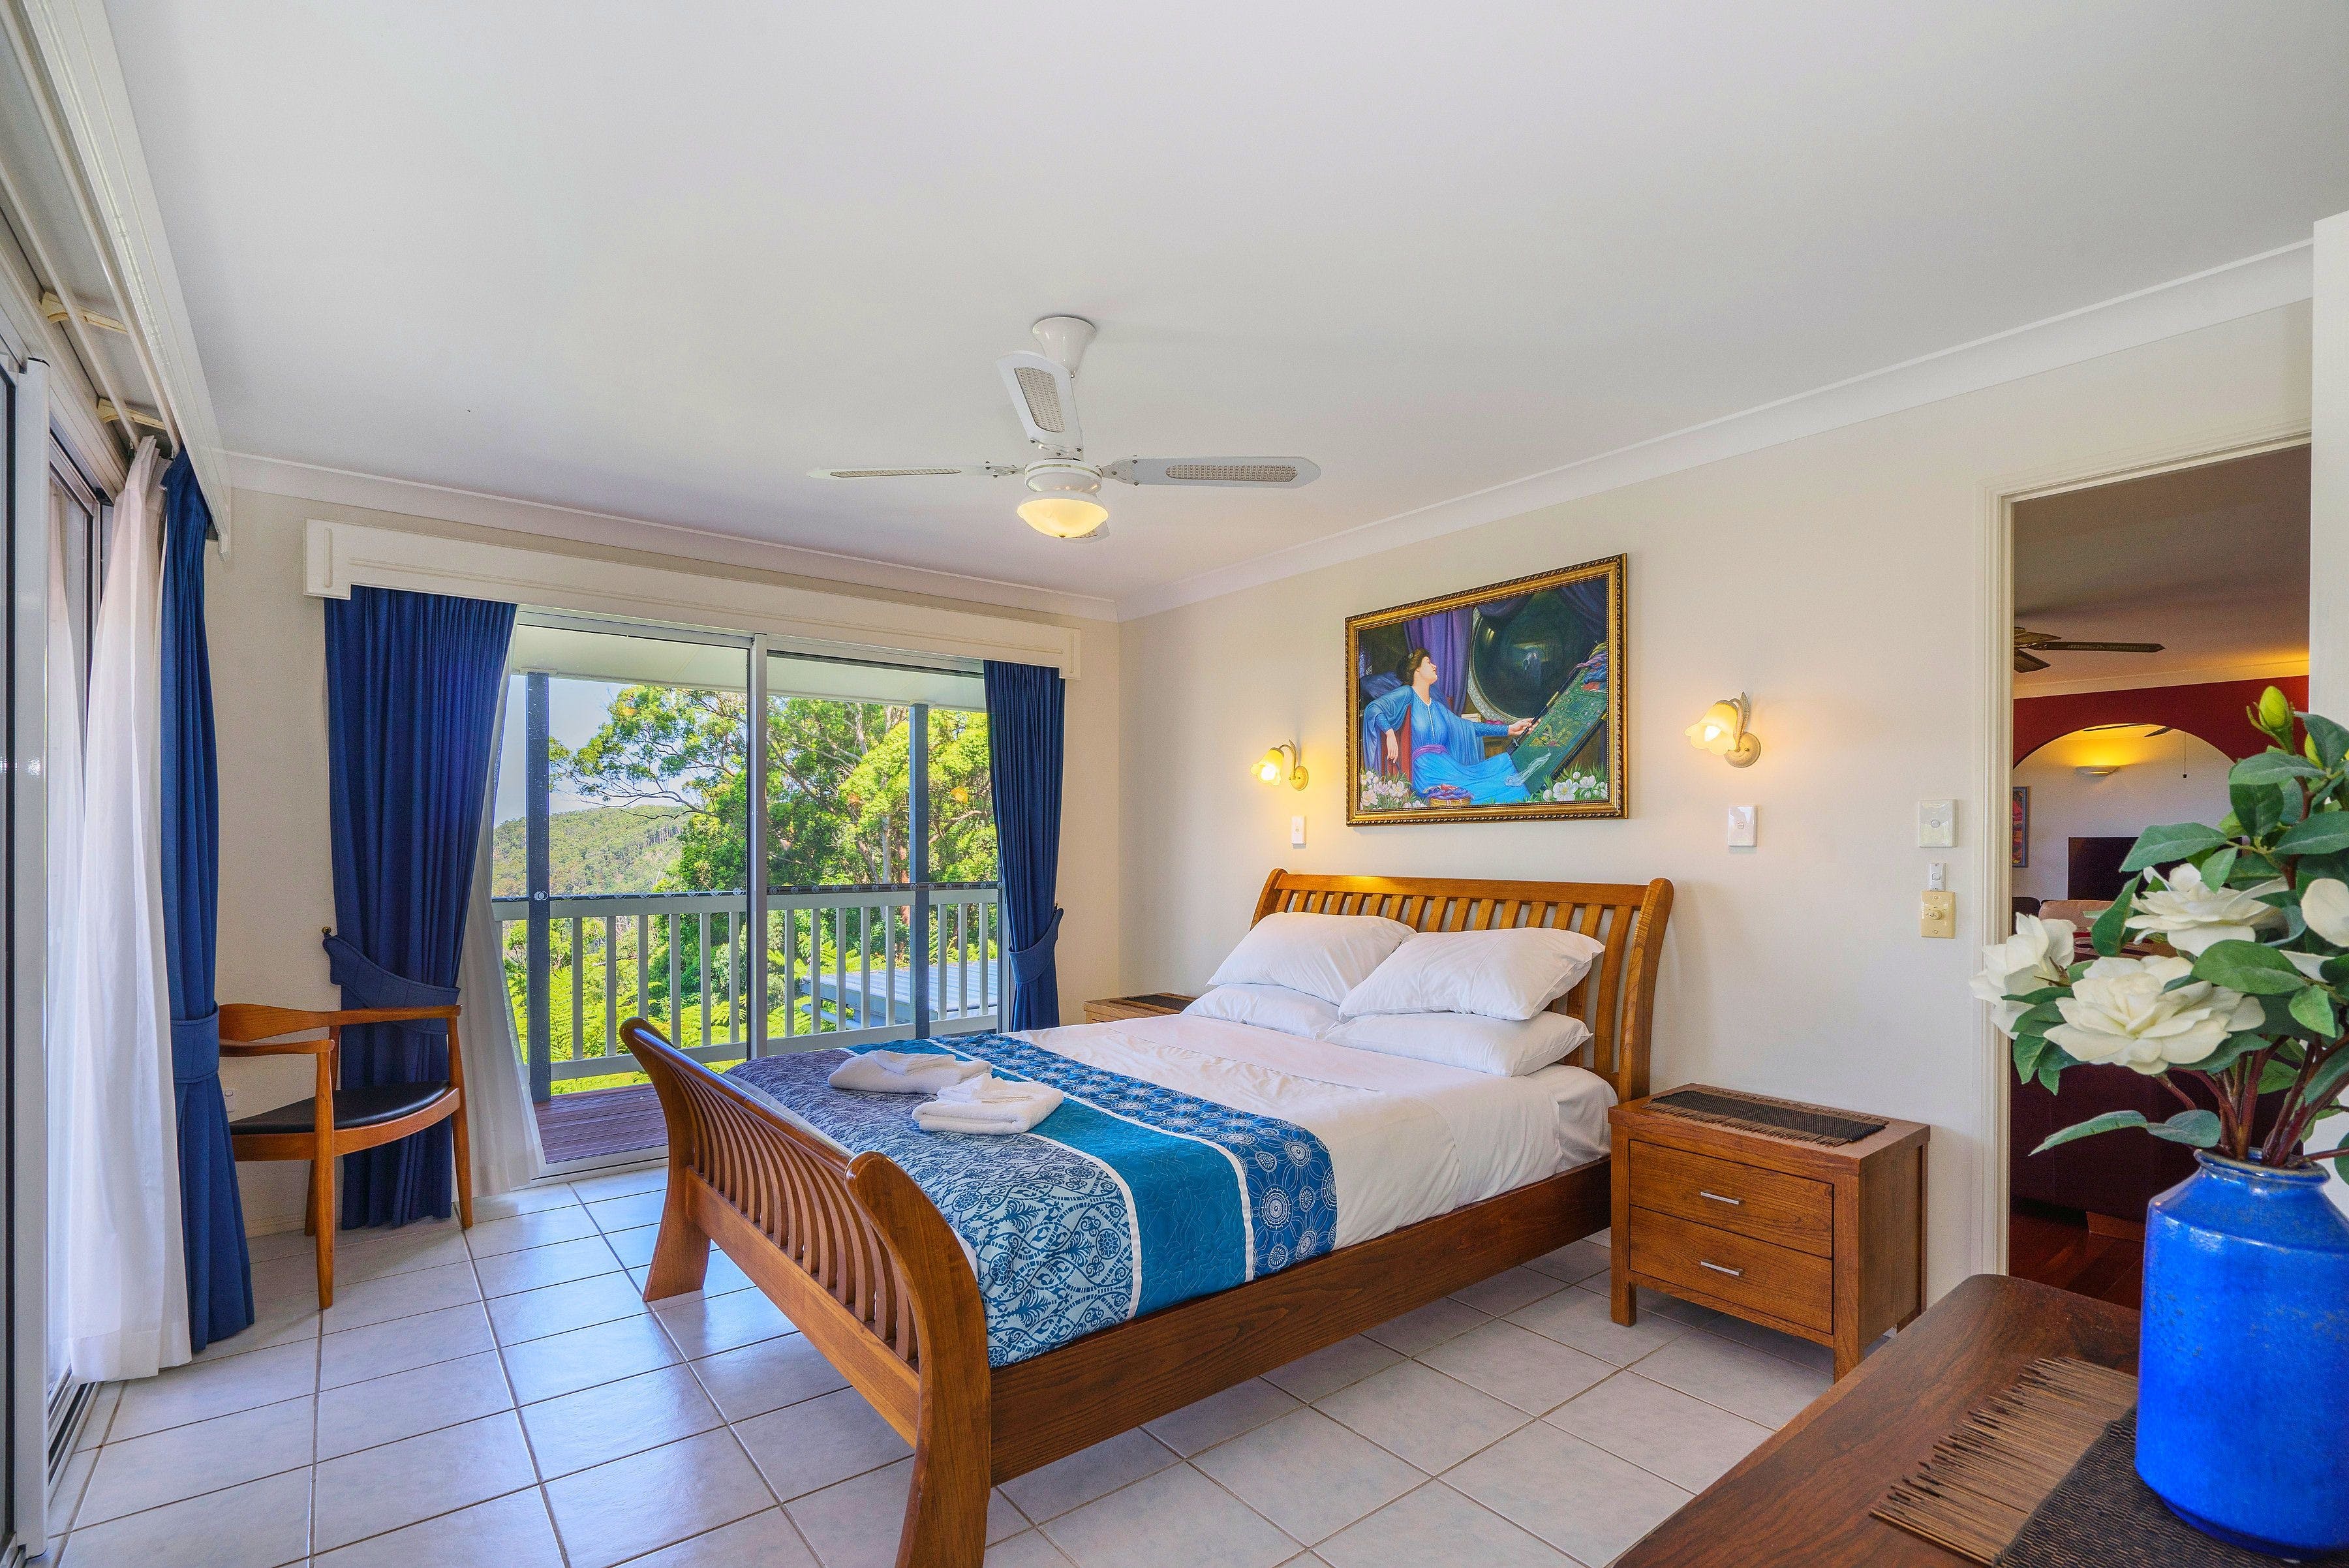 Cloud 9 Cliff Top Eagle Heights - Accommodation Bookings 2